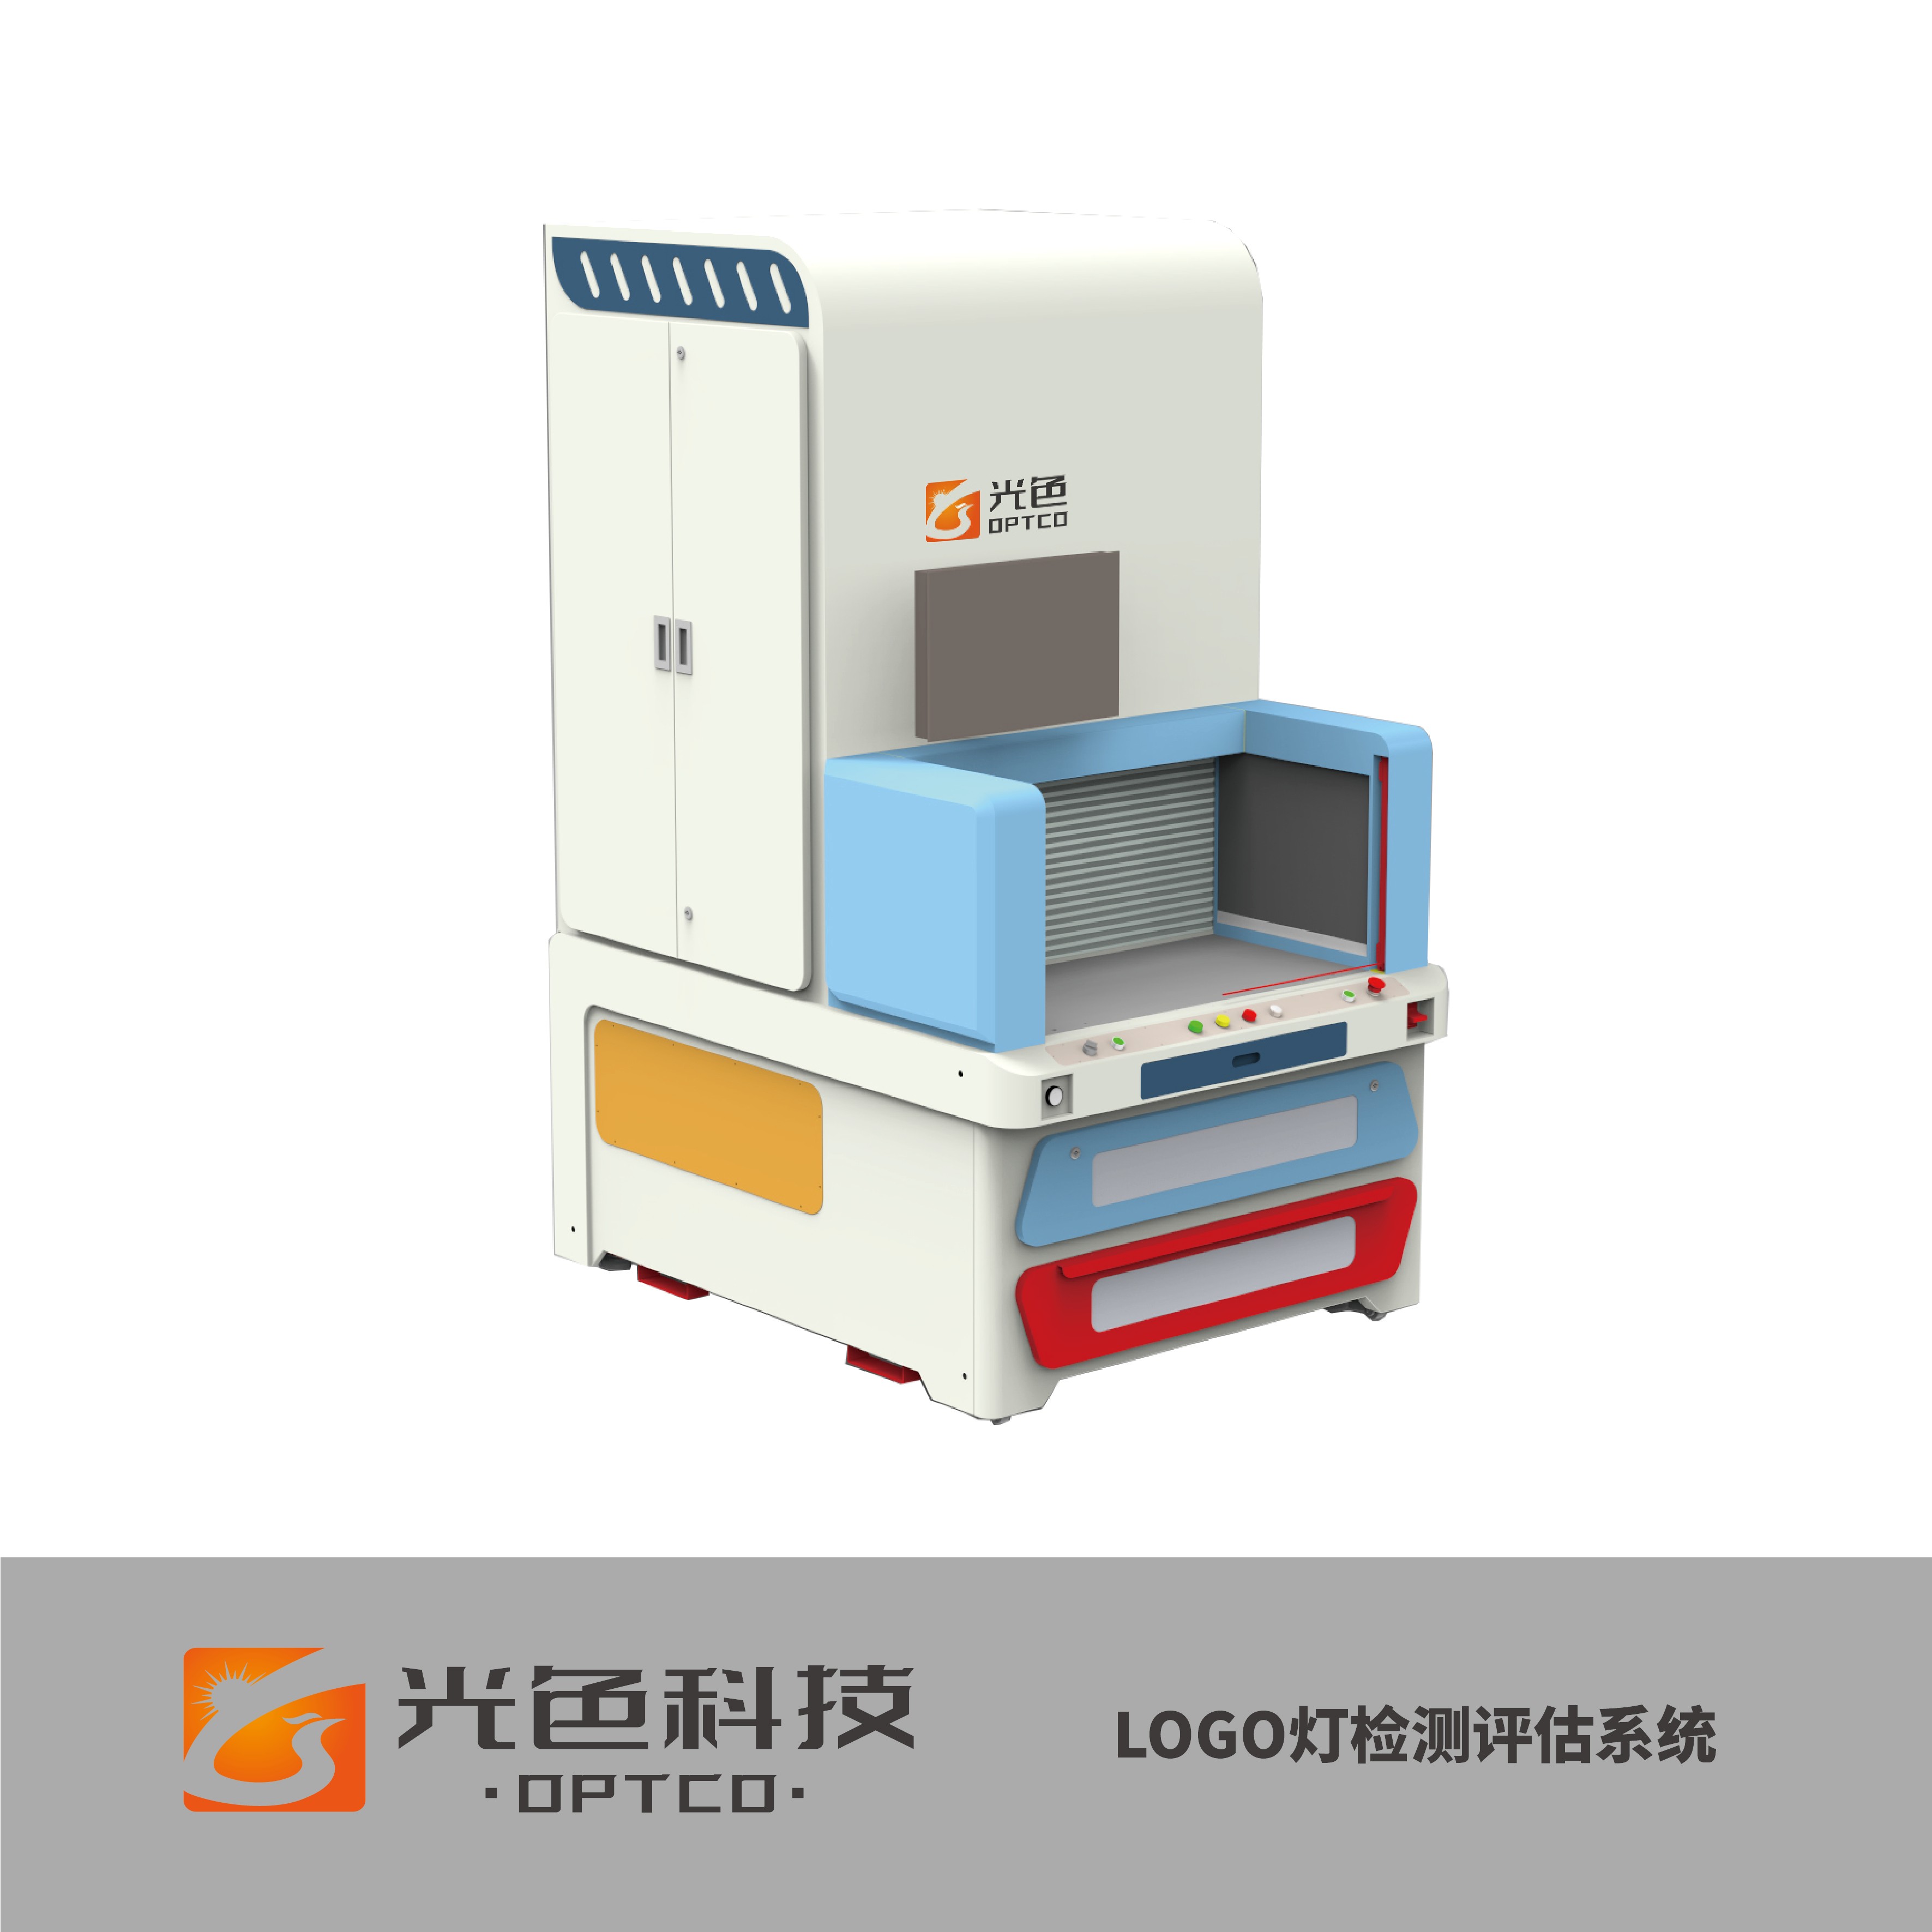 Automotive LOGO lamp module and assembly Optical-Color
test system, suitable for automatic light distribution test, defect detection, Optical-Color quality sampling and batch full test of LOGO lamp module and assembly.